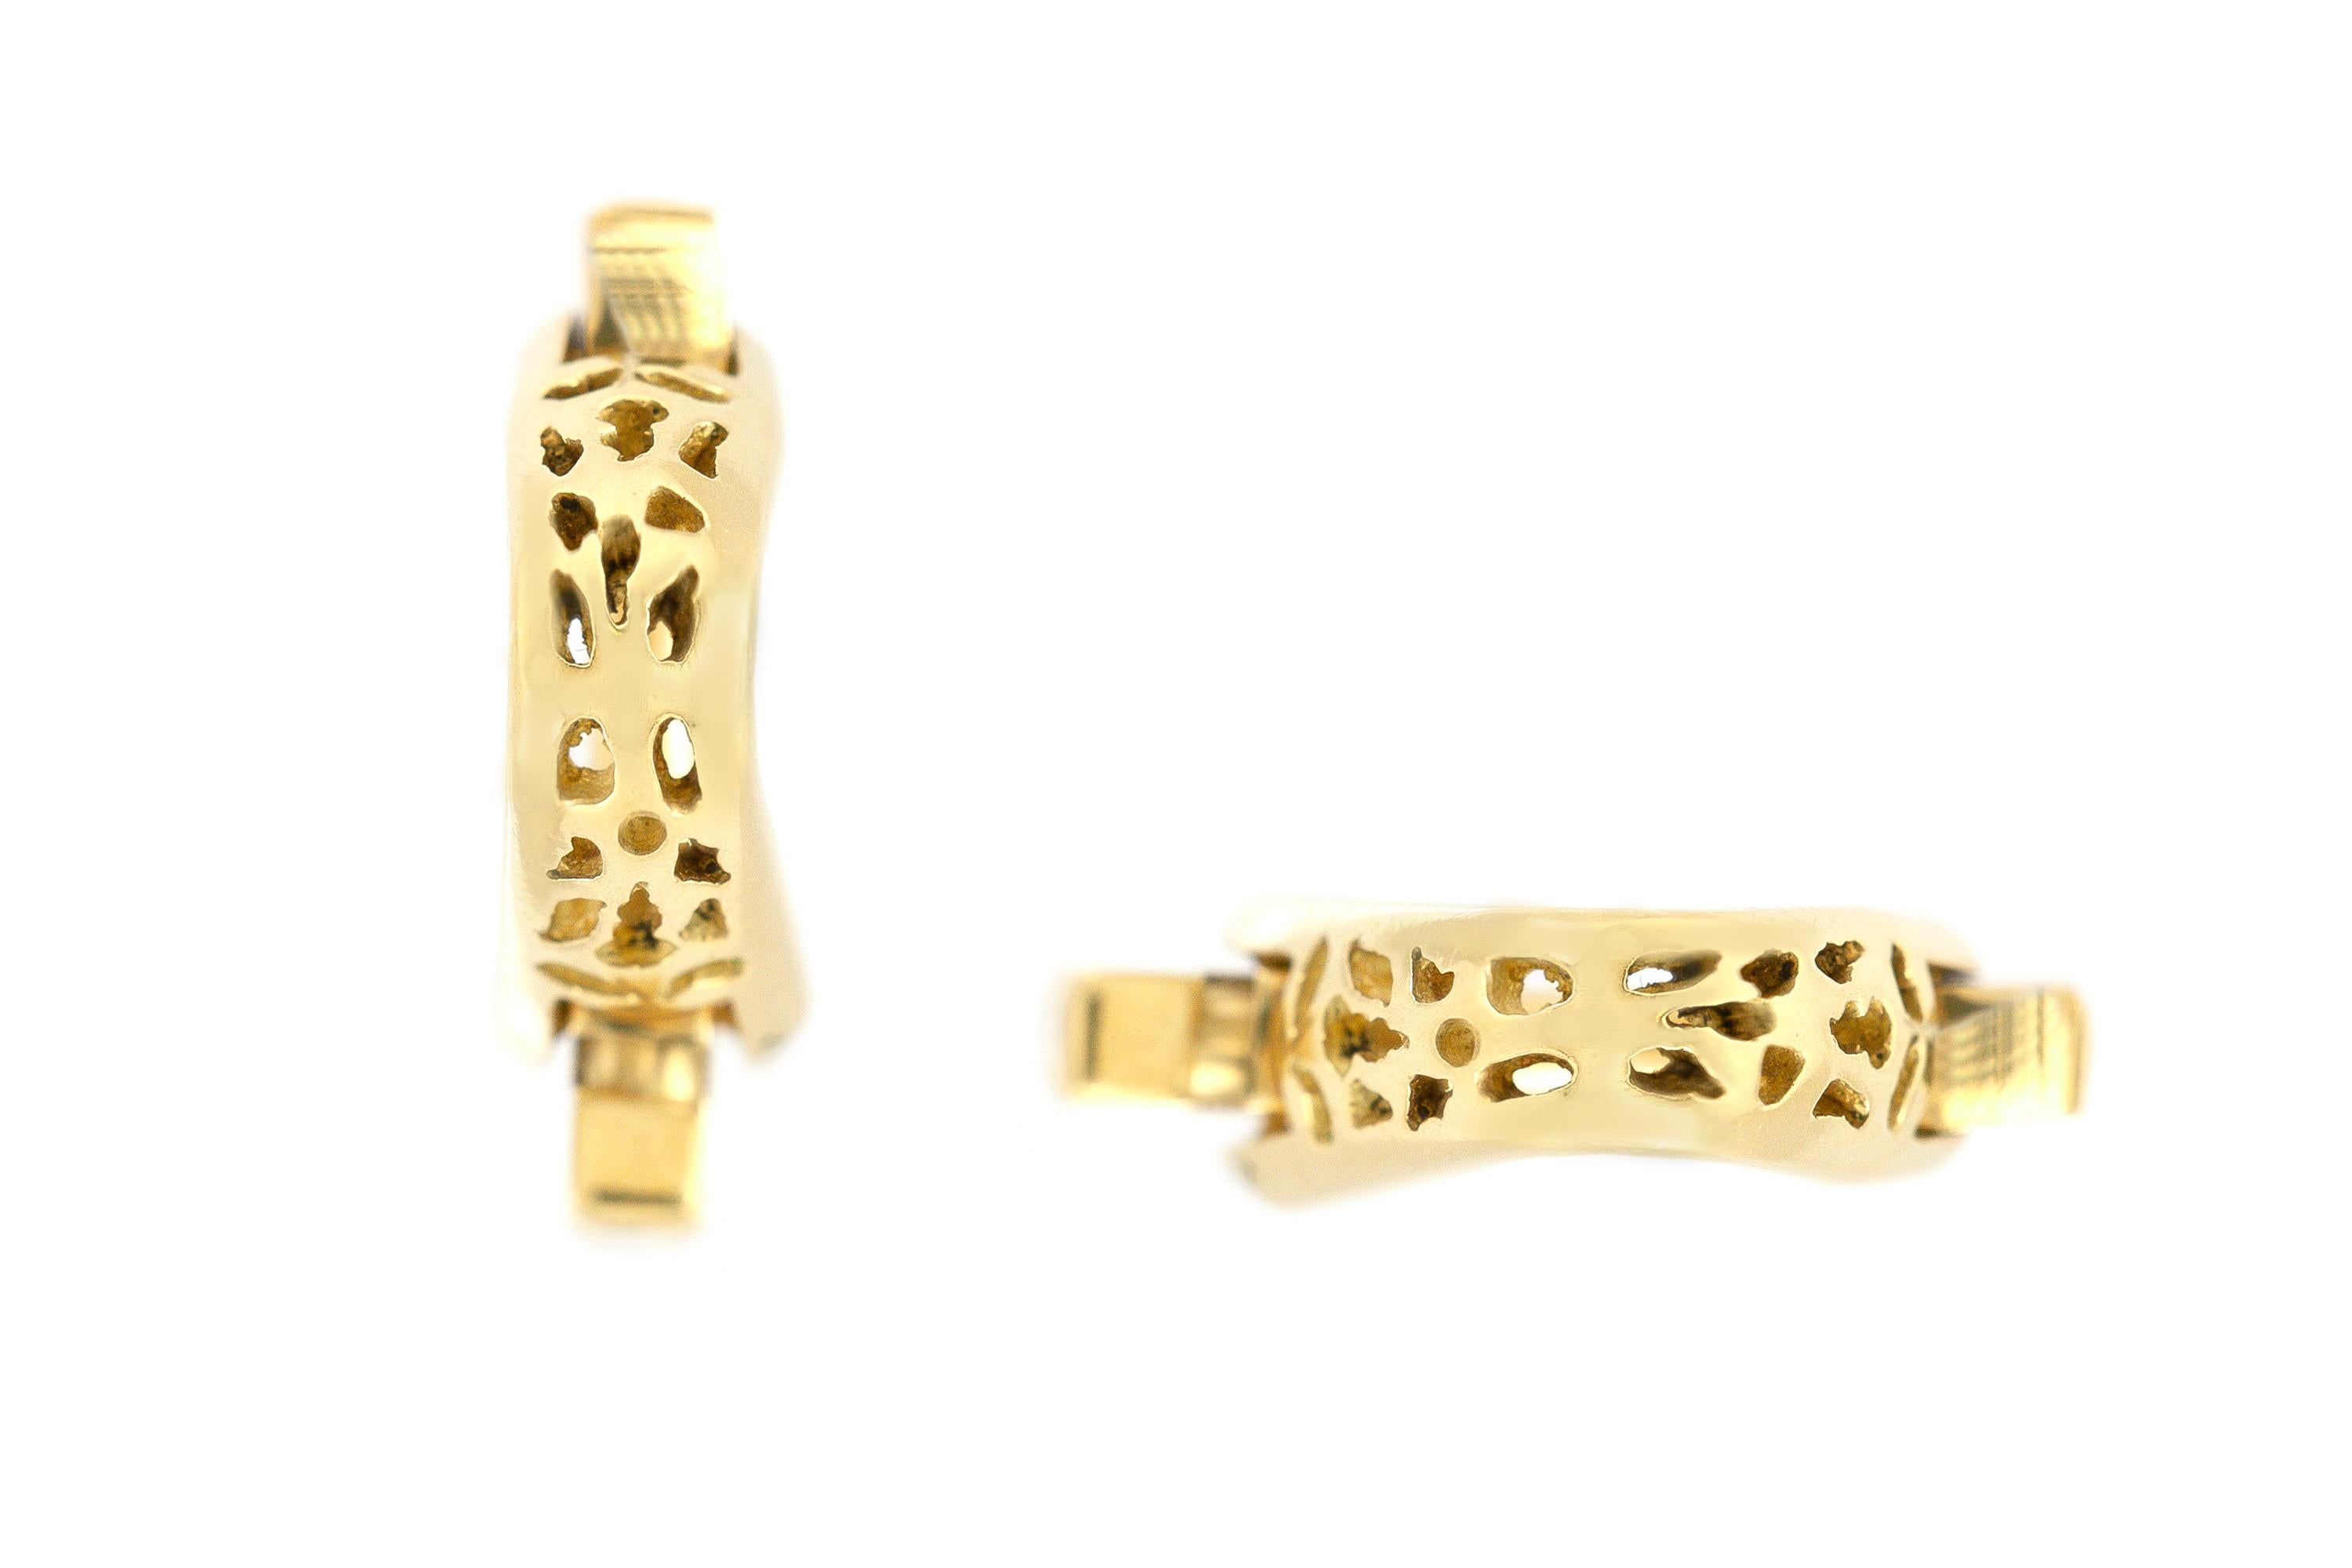 Cufflinks finely crafted in 18k yellow gold, weighing 3.5 dwt., size of each cufflink is 0.80 inch. Circa 1970.